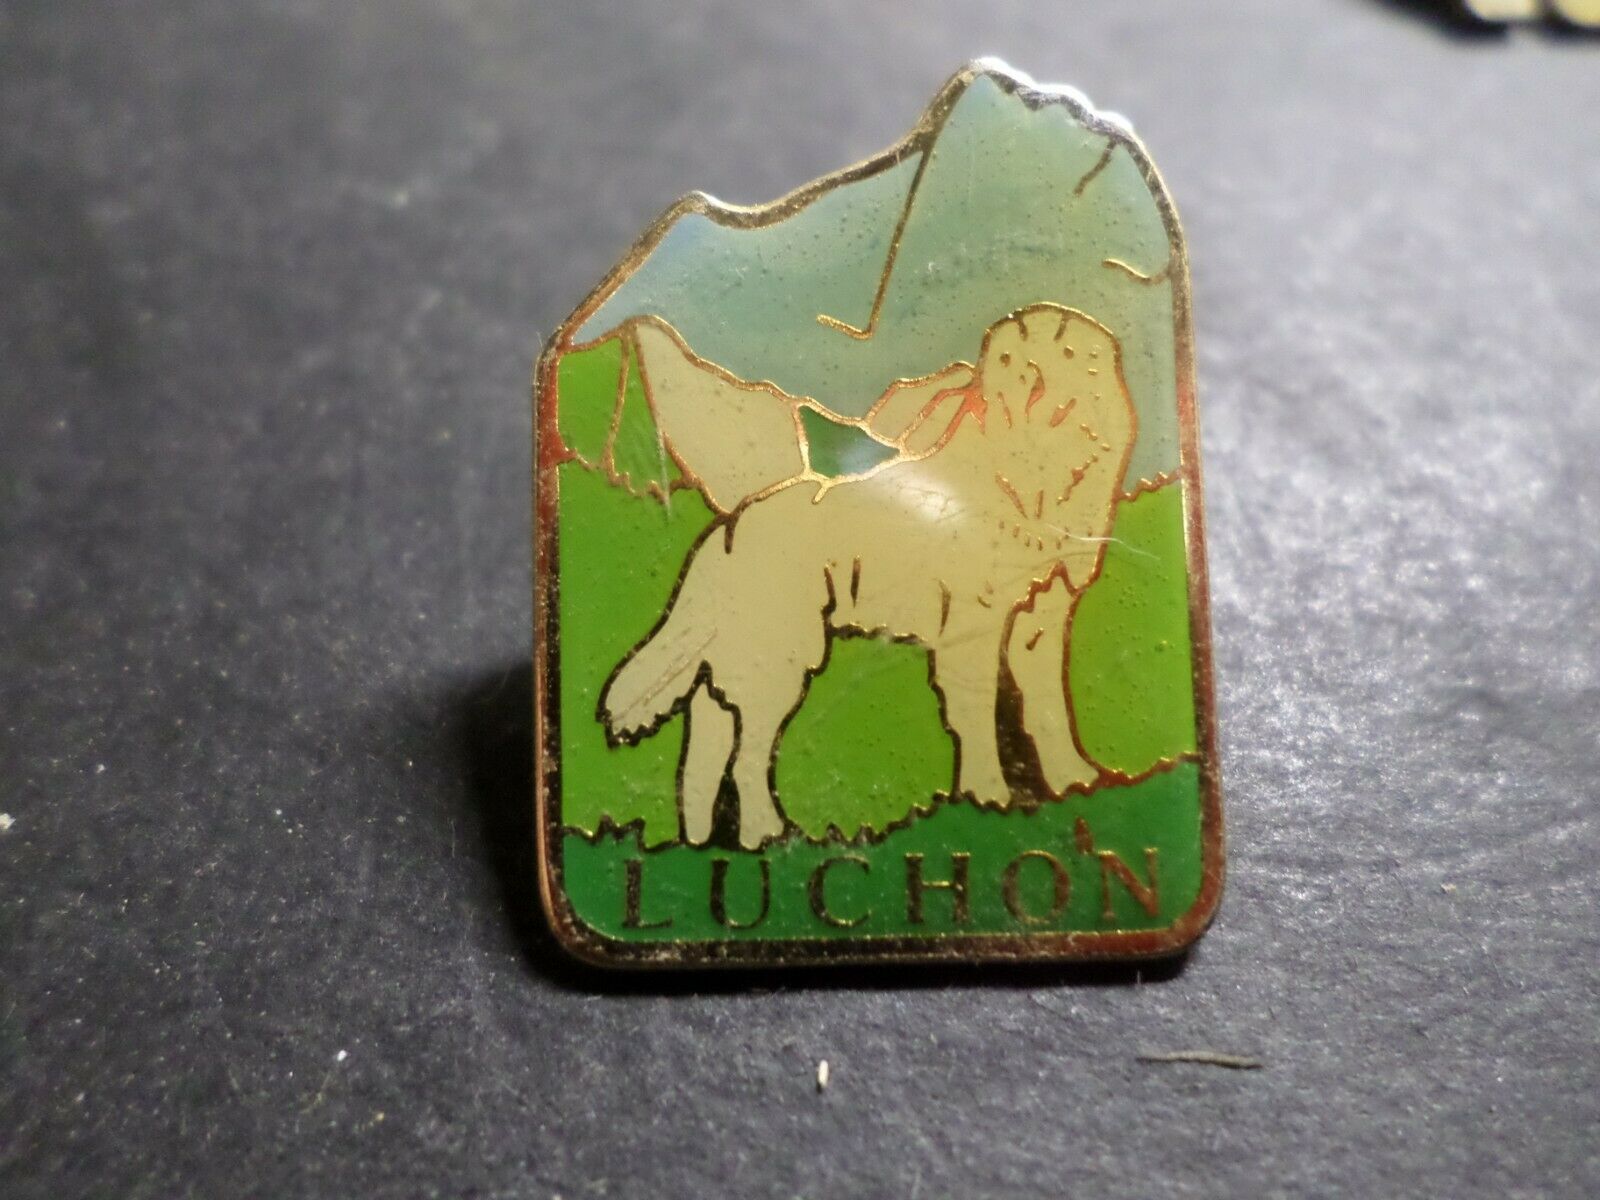 Collection Pin's Objects Advertising Images, Luchon, Dog, Dog Badget